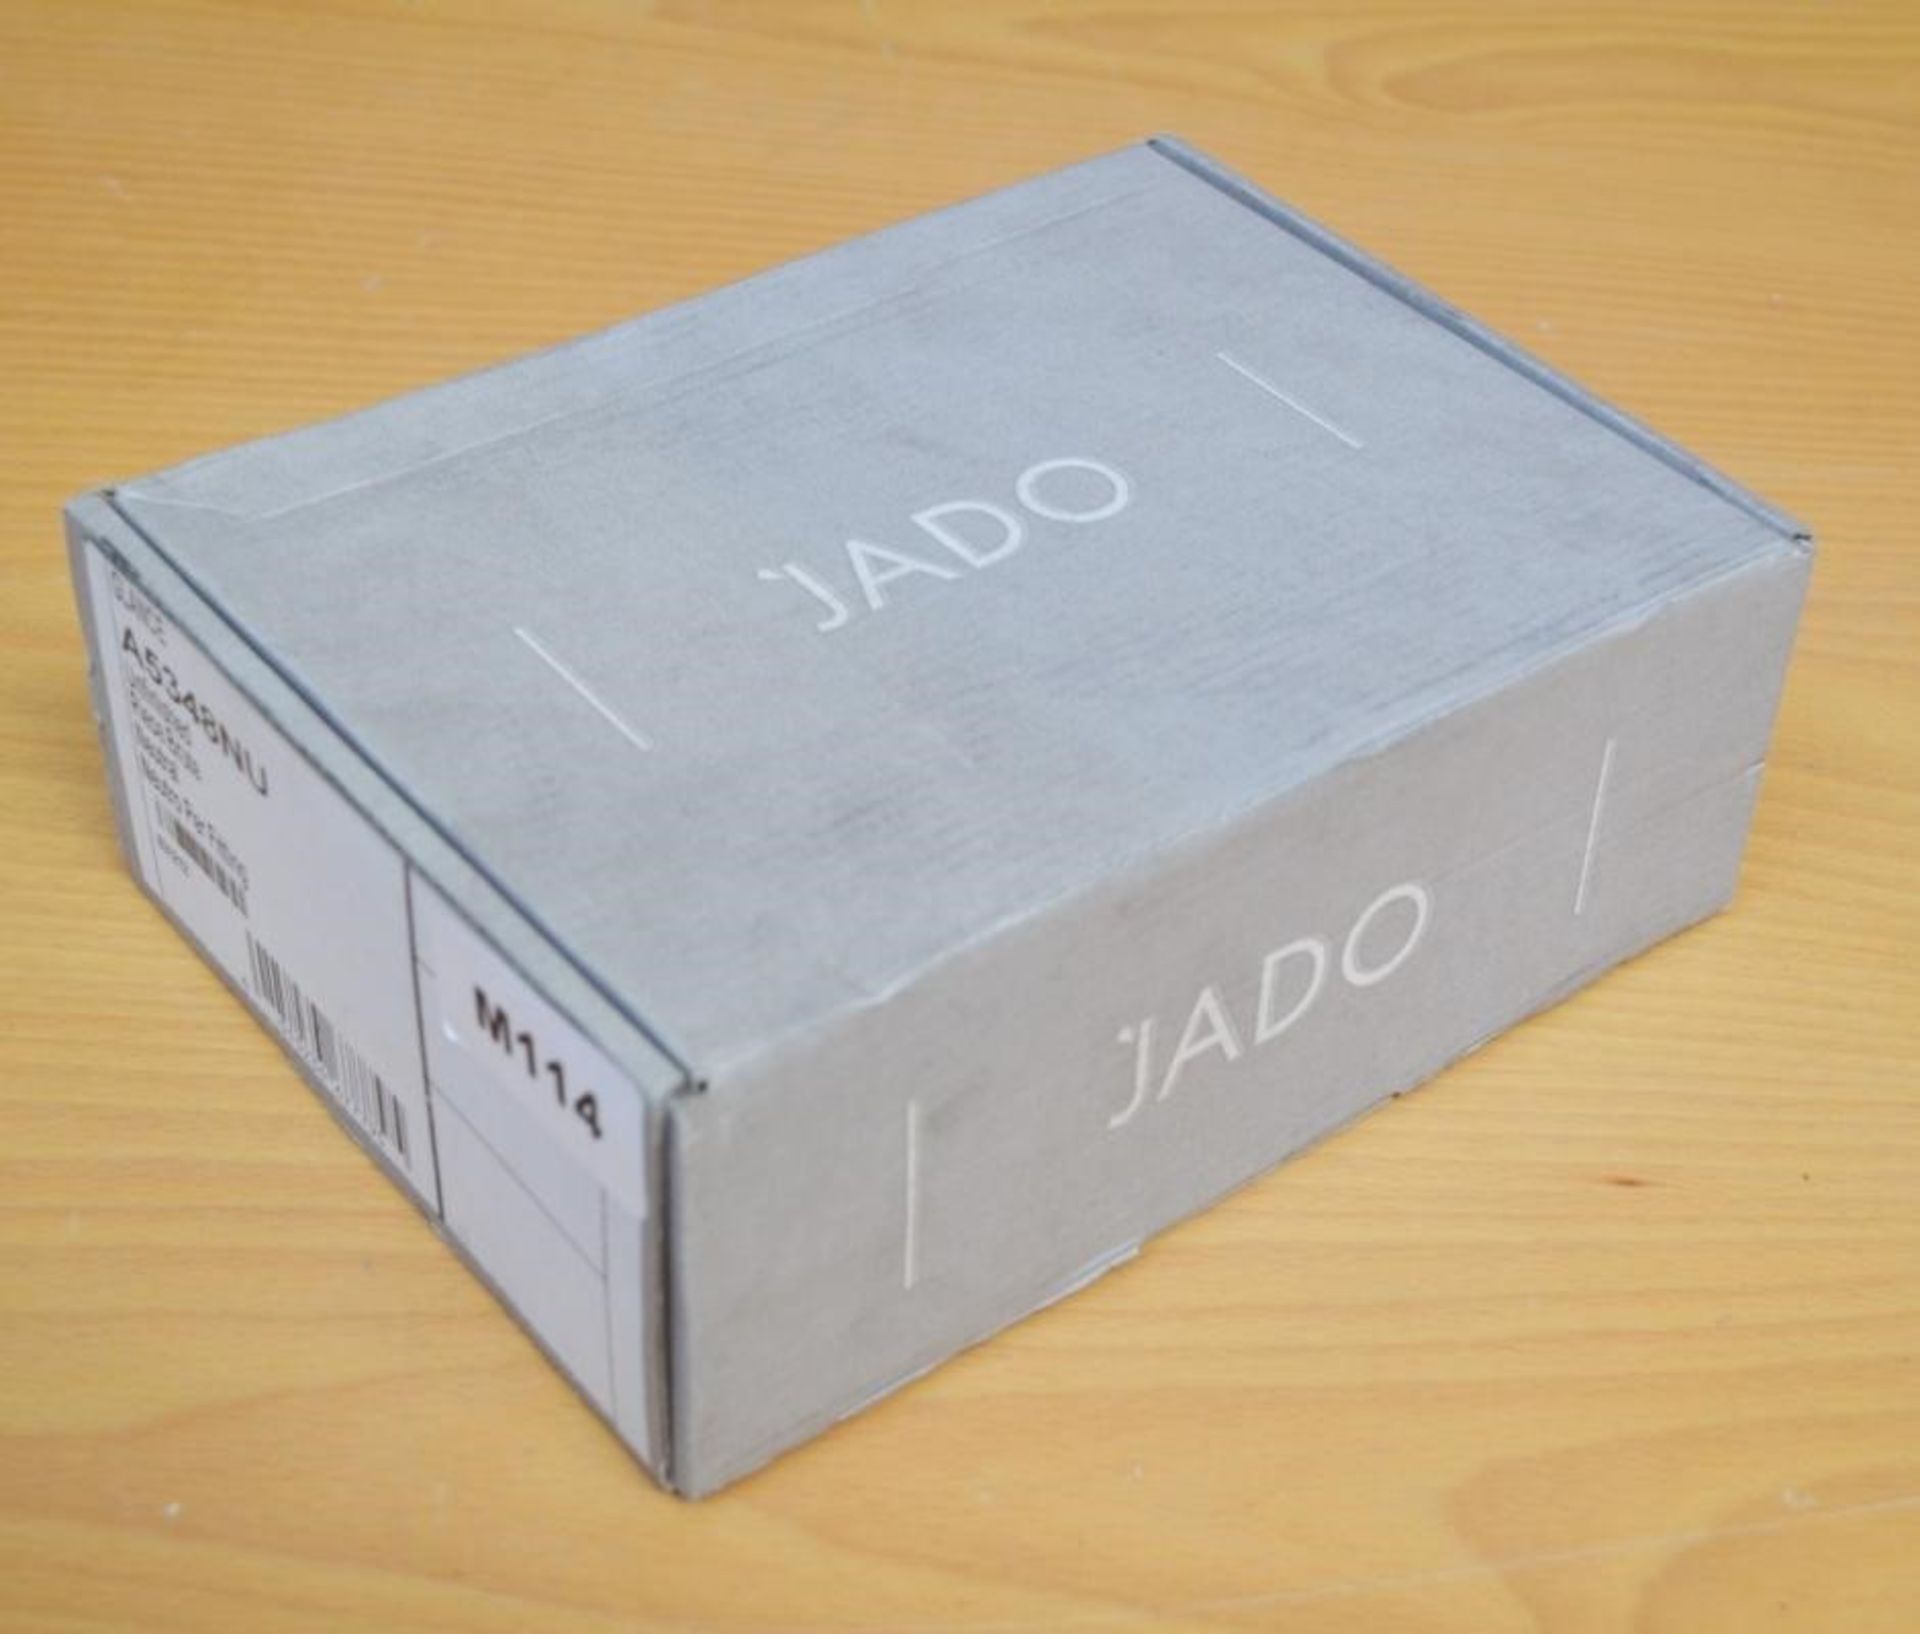 1 x Ideal Standard JADO "Glance" Concealed Parts (A5348NU) - Chrome Finish - New / Unused Boxed Stoc - Image 3 of 8